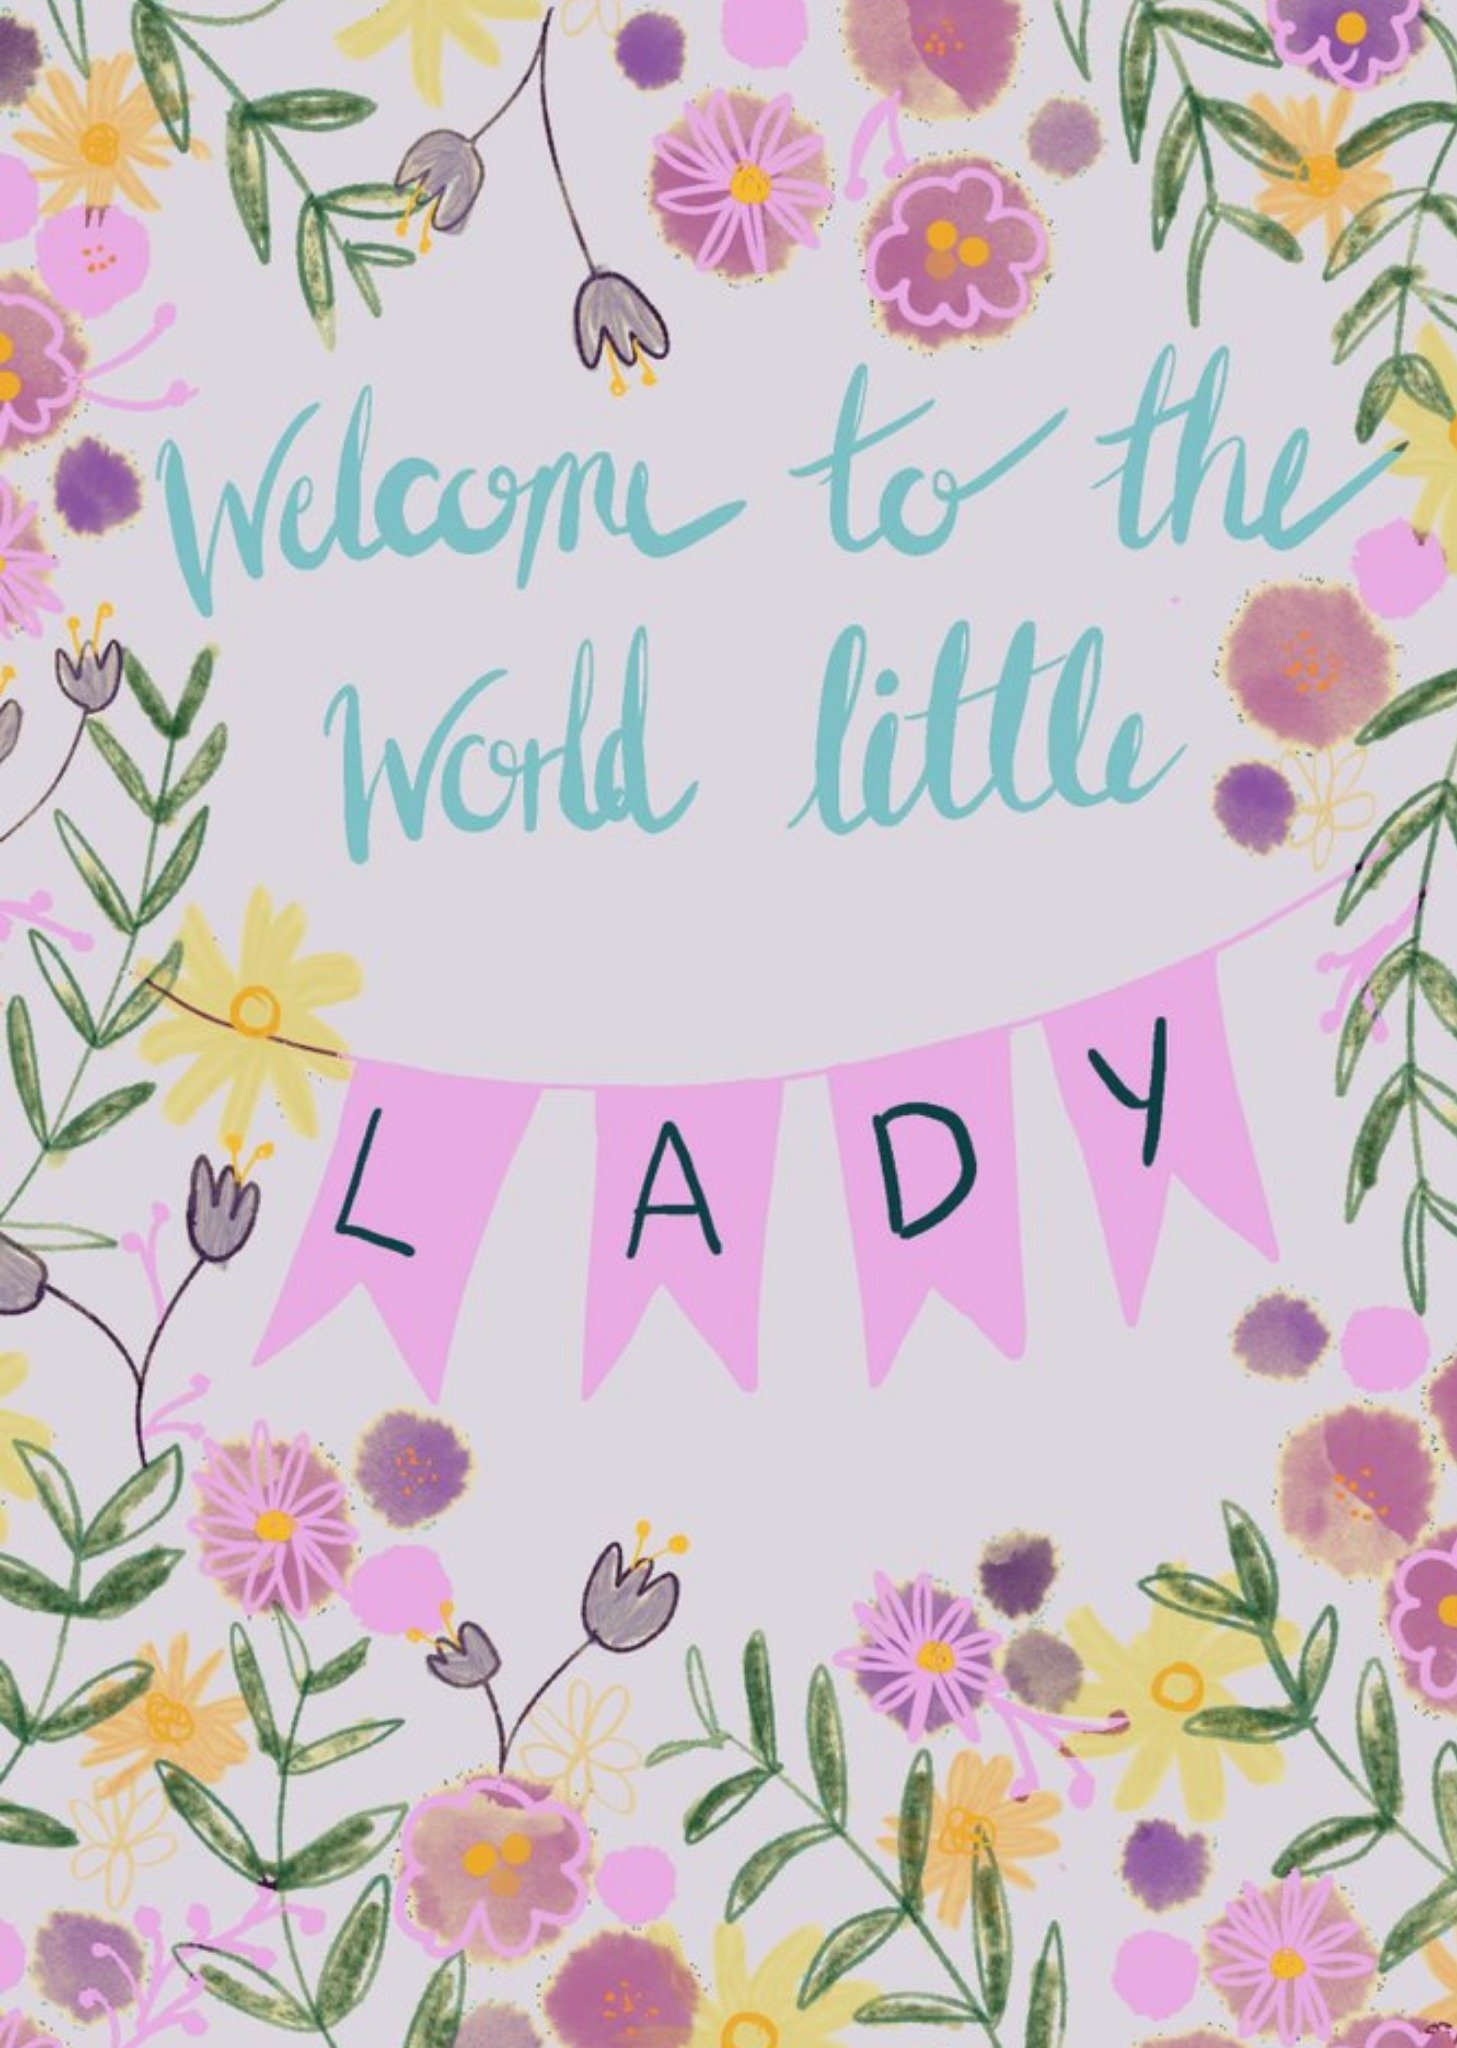 Moonpig Illustrated Welcome To The World Little Lady Card Ecard